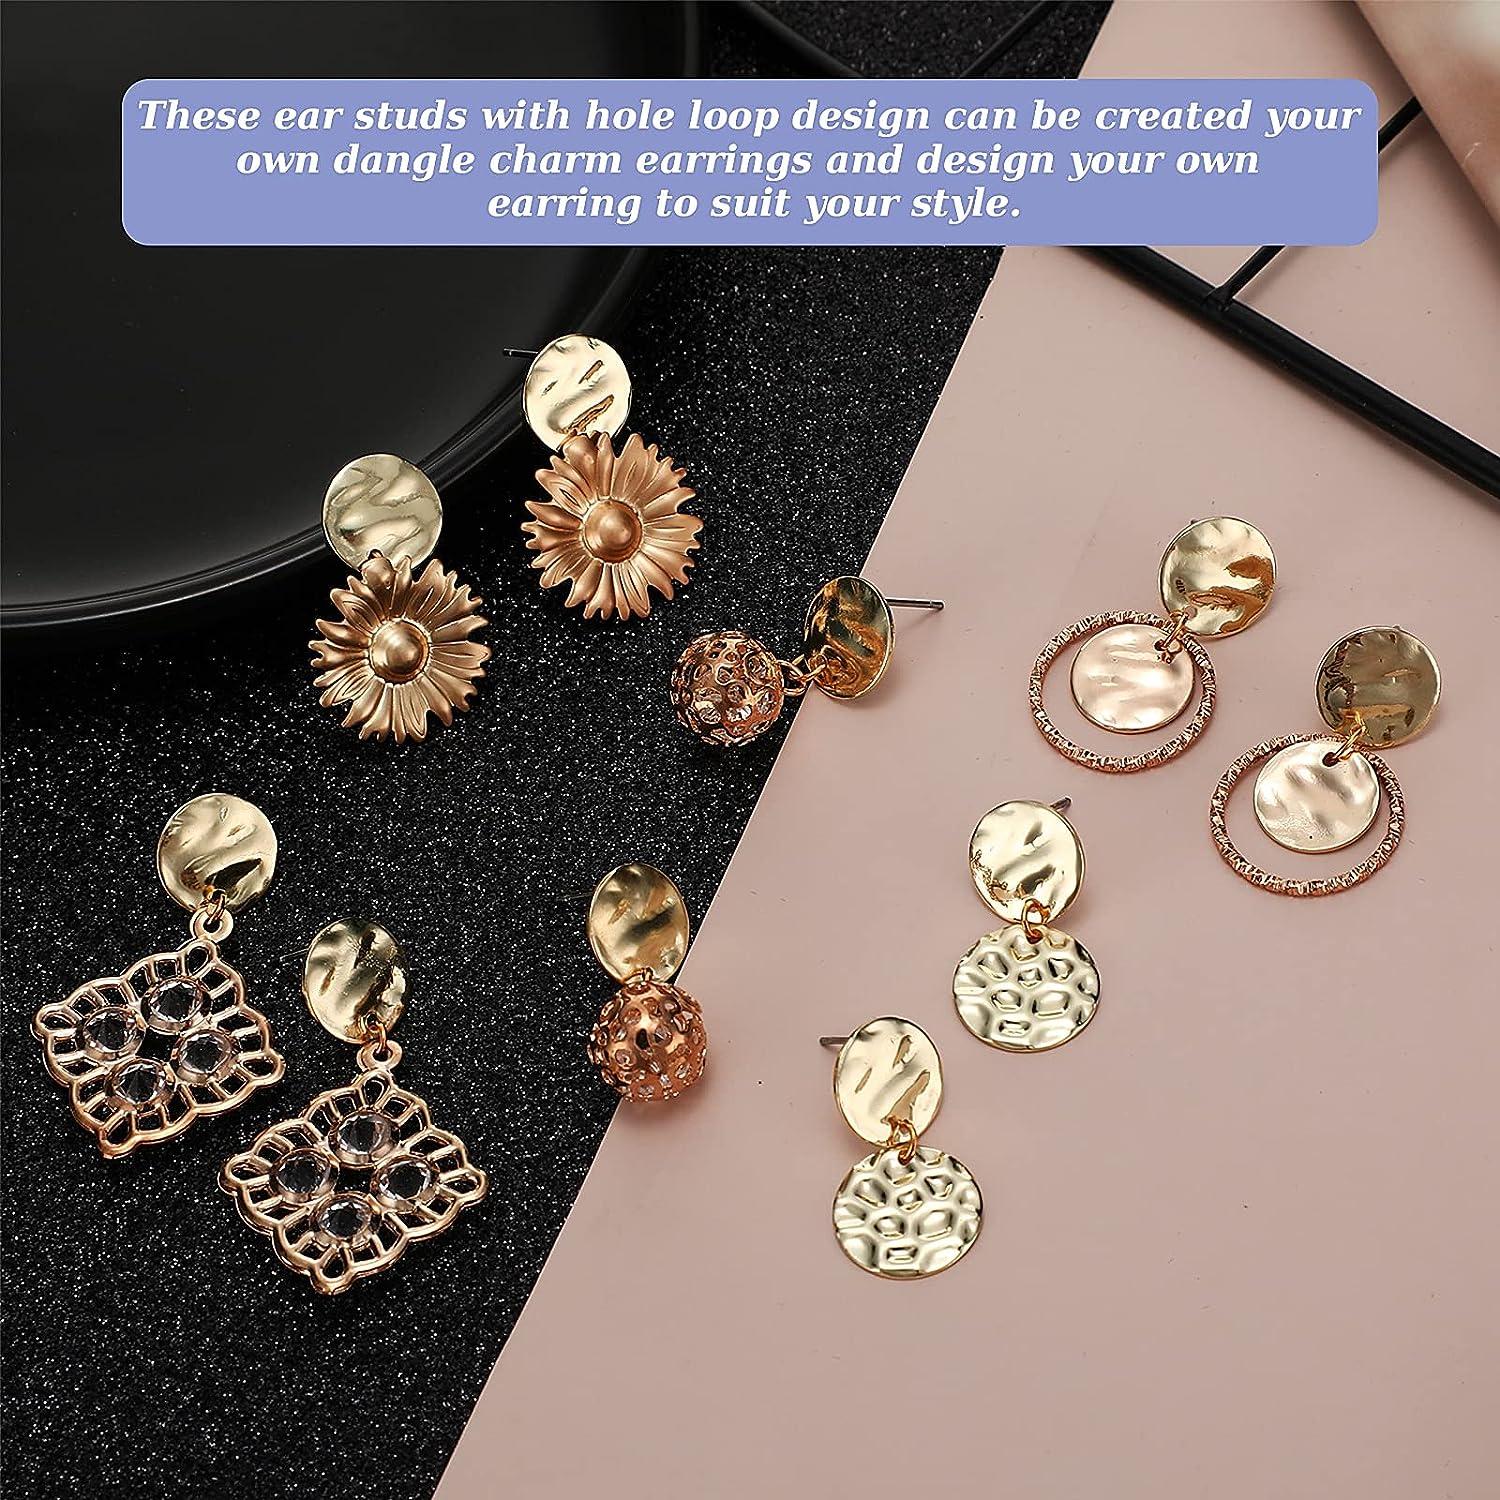 50 Pieces Flat Round Ear Studs Earring Posts with Loop Hole Coin Jewelry  13.0 mm Gold Plated Disc Charms Earring for DIY Earrings Craft Making  Supplies for Women Girls KC Gold